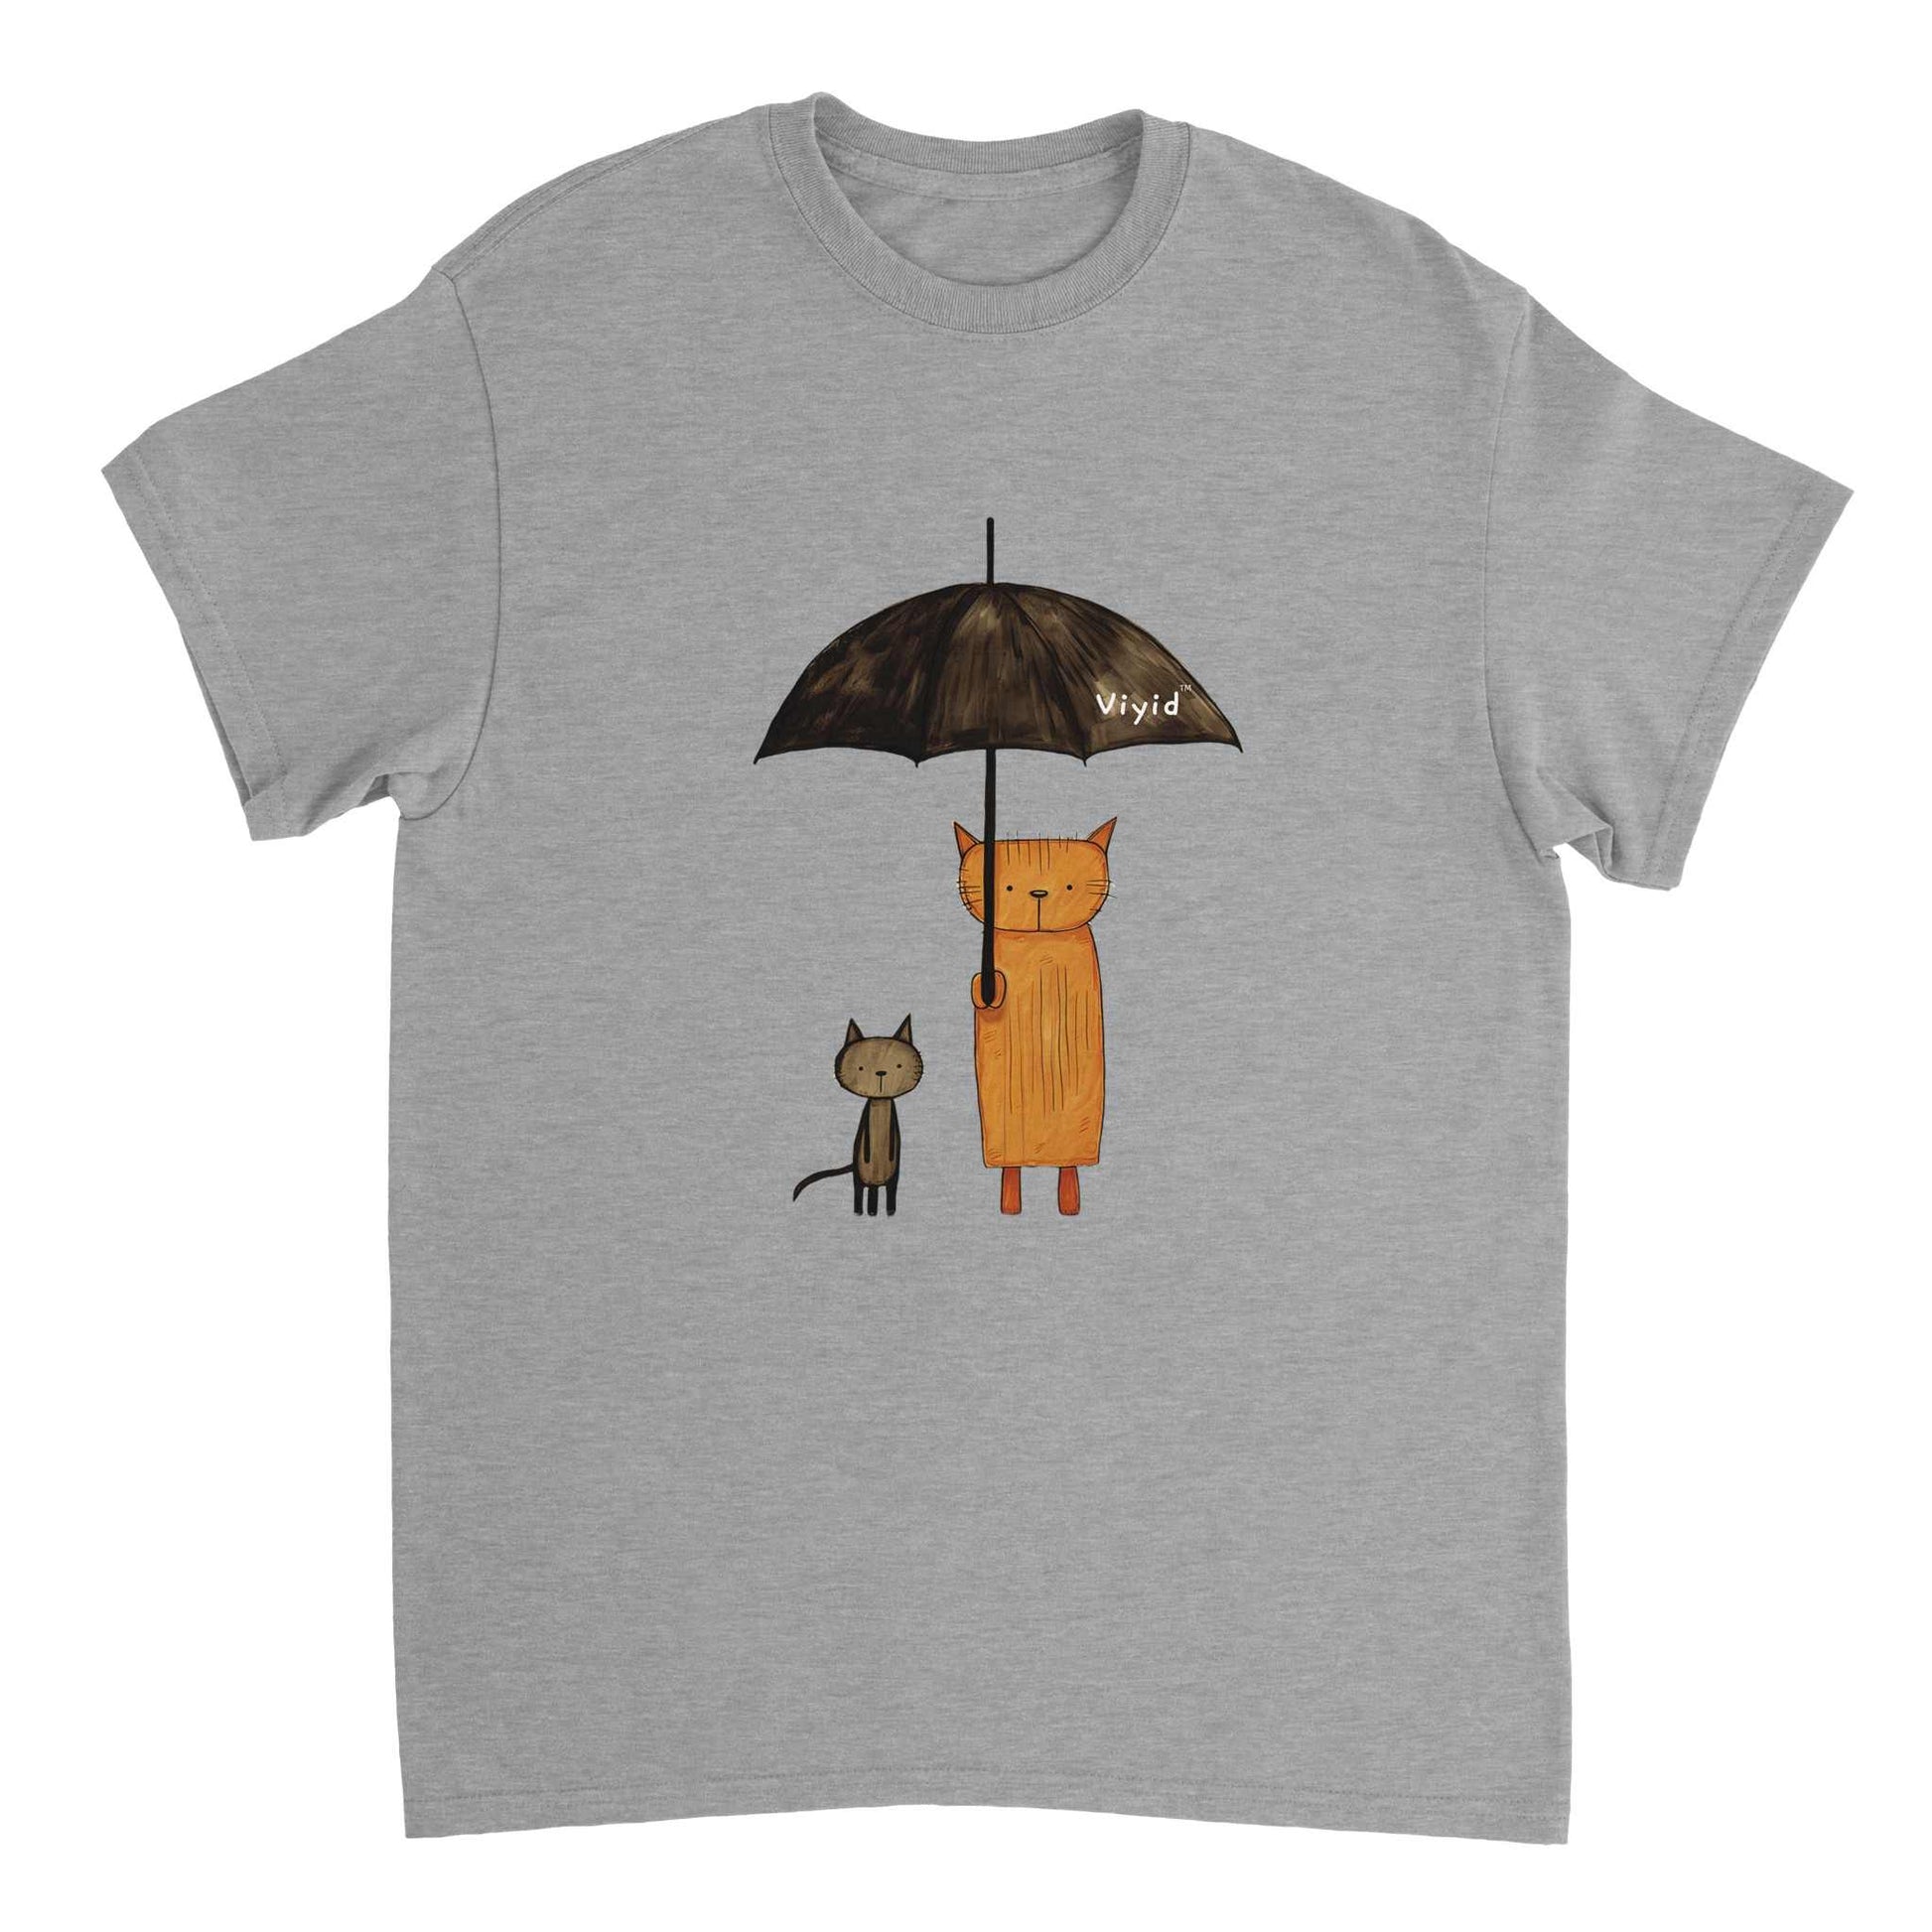 abstract cats with umbrella adult t-shirt sports grey